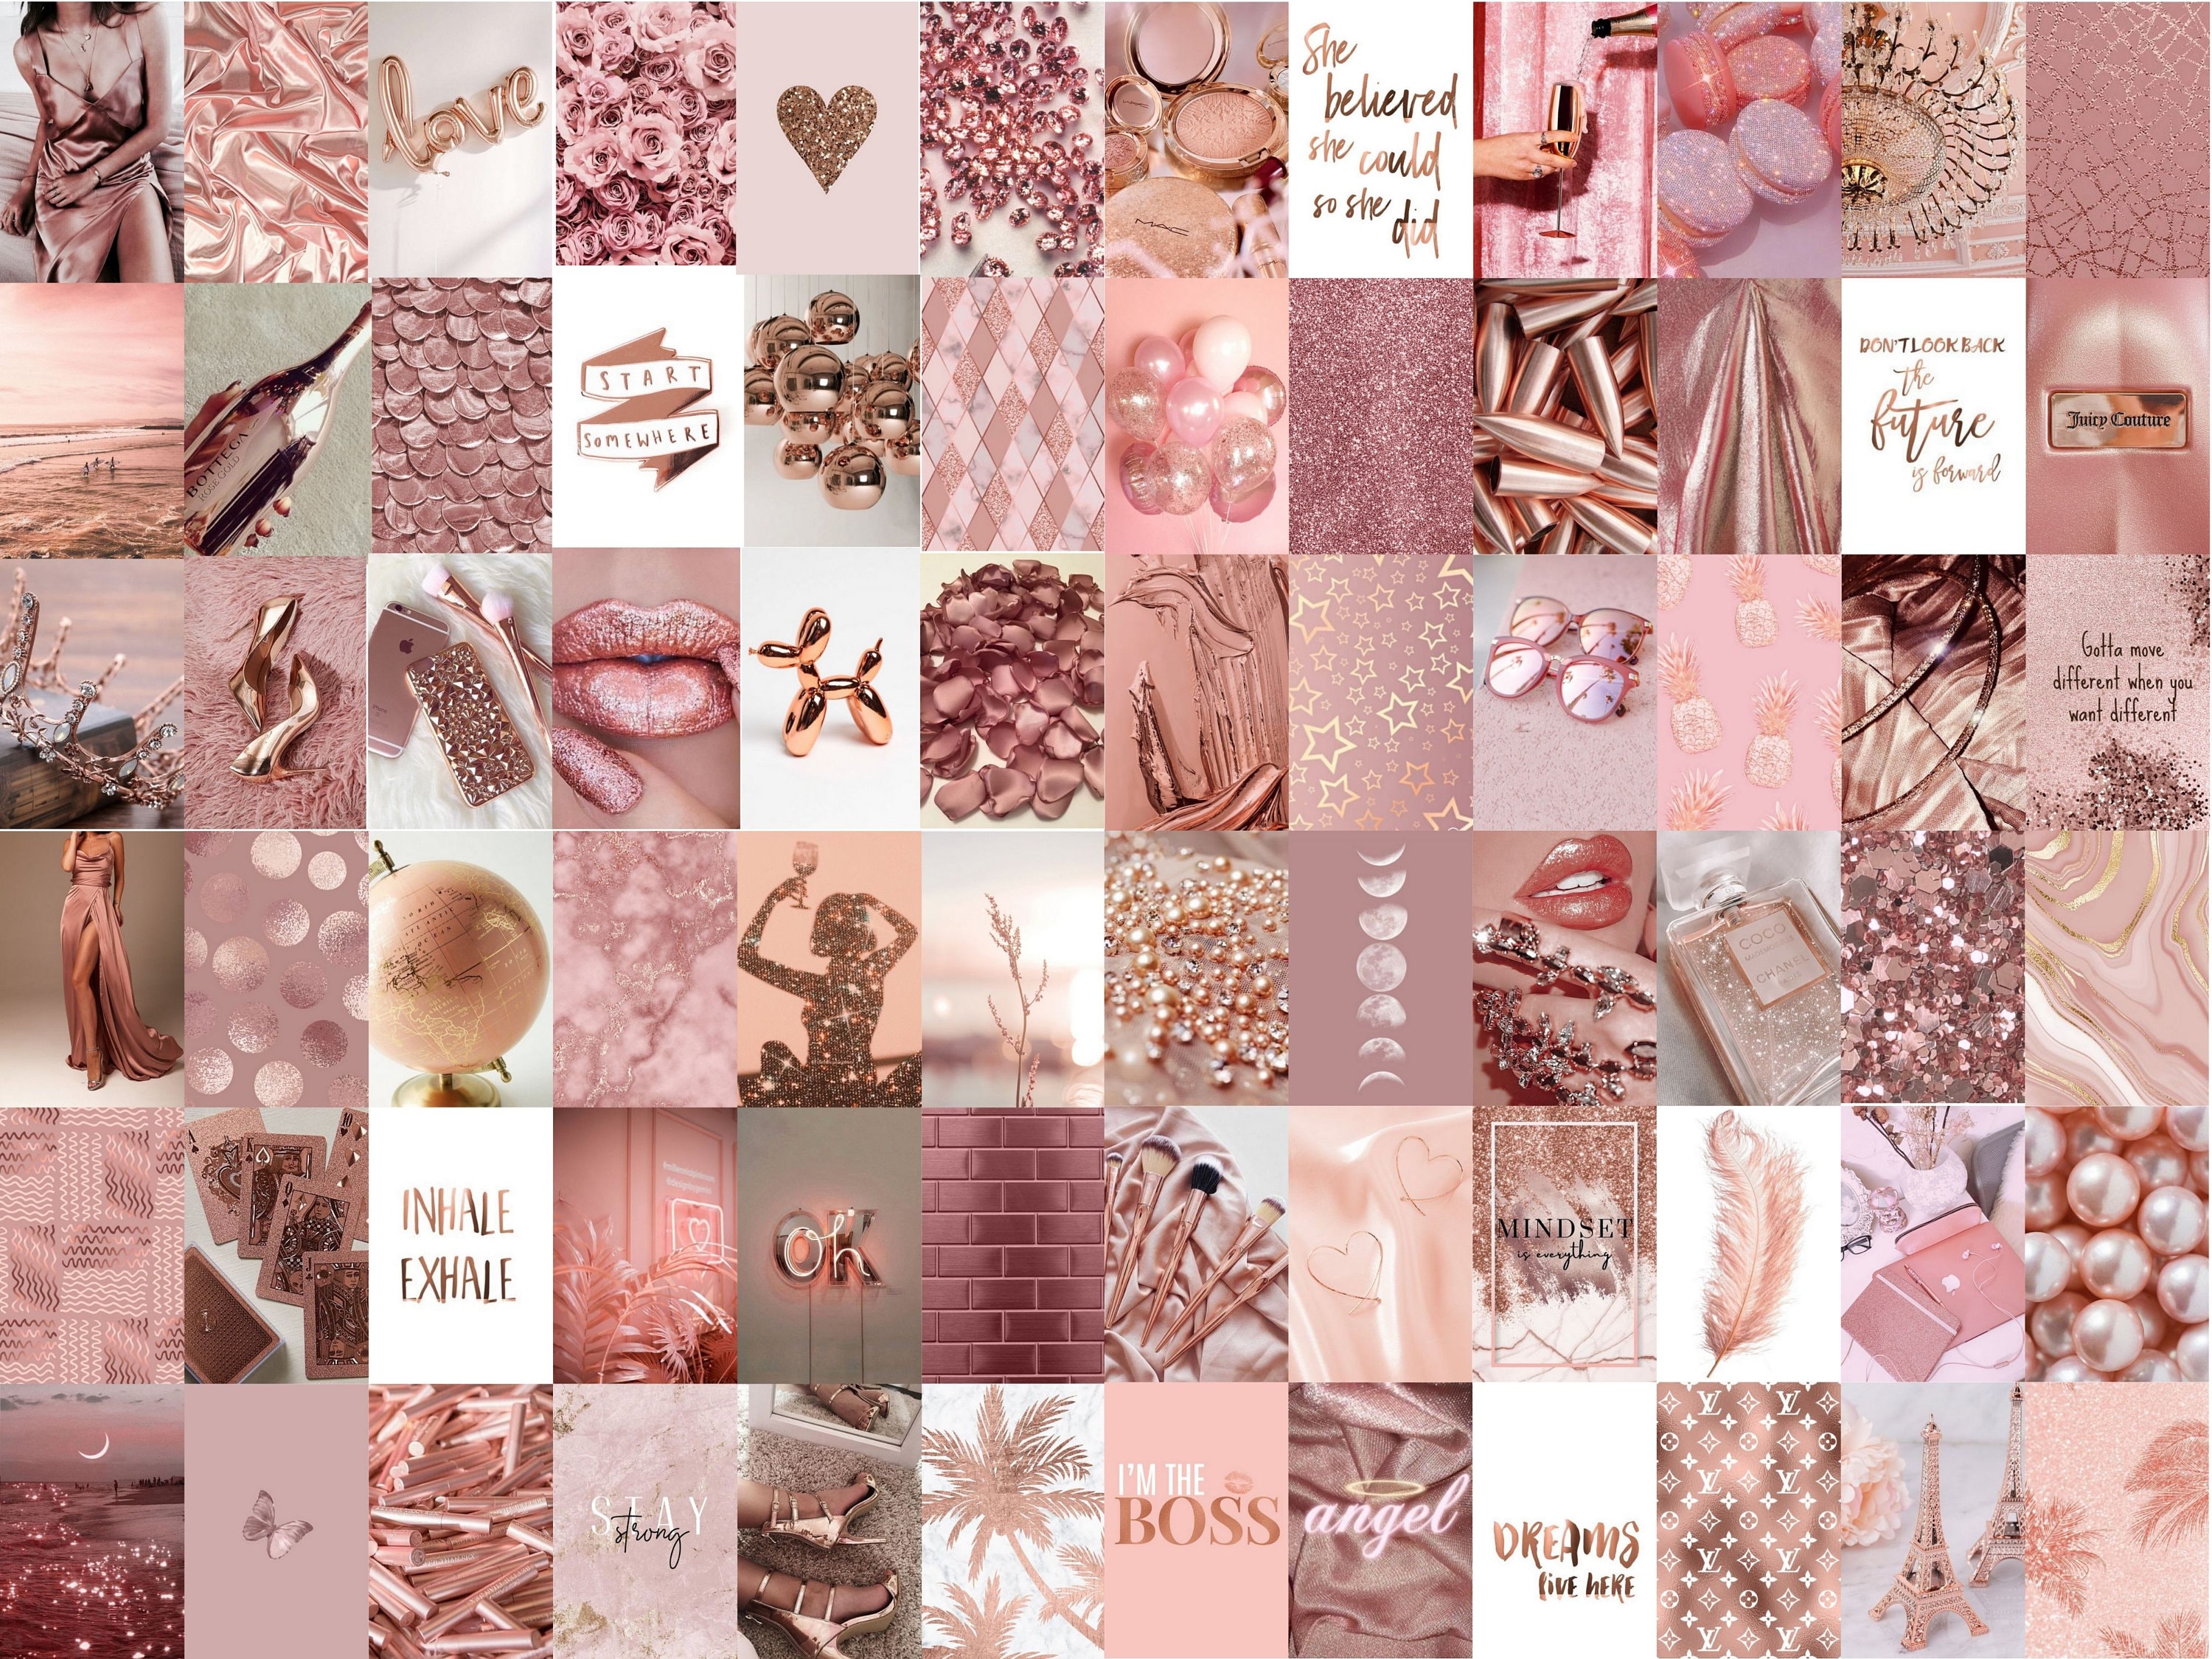 A collage of pink and gold images - Rose gold